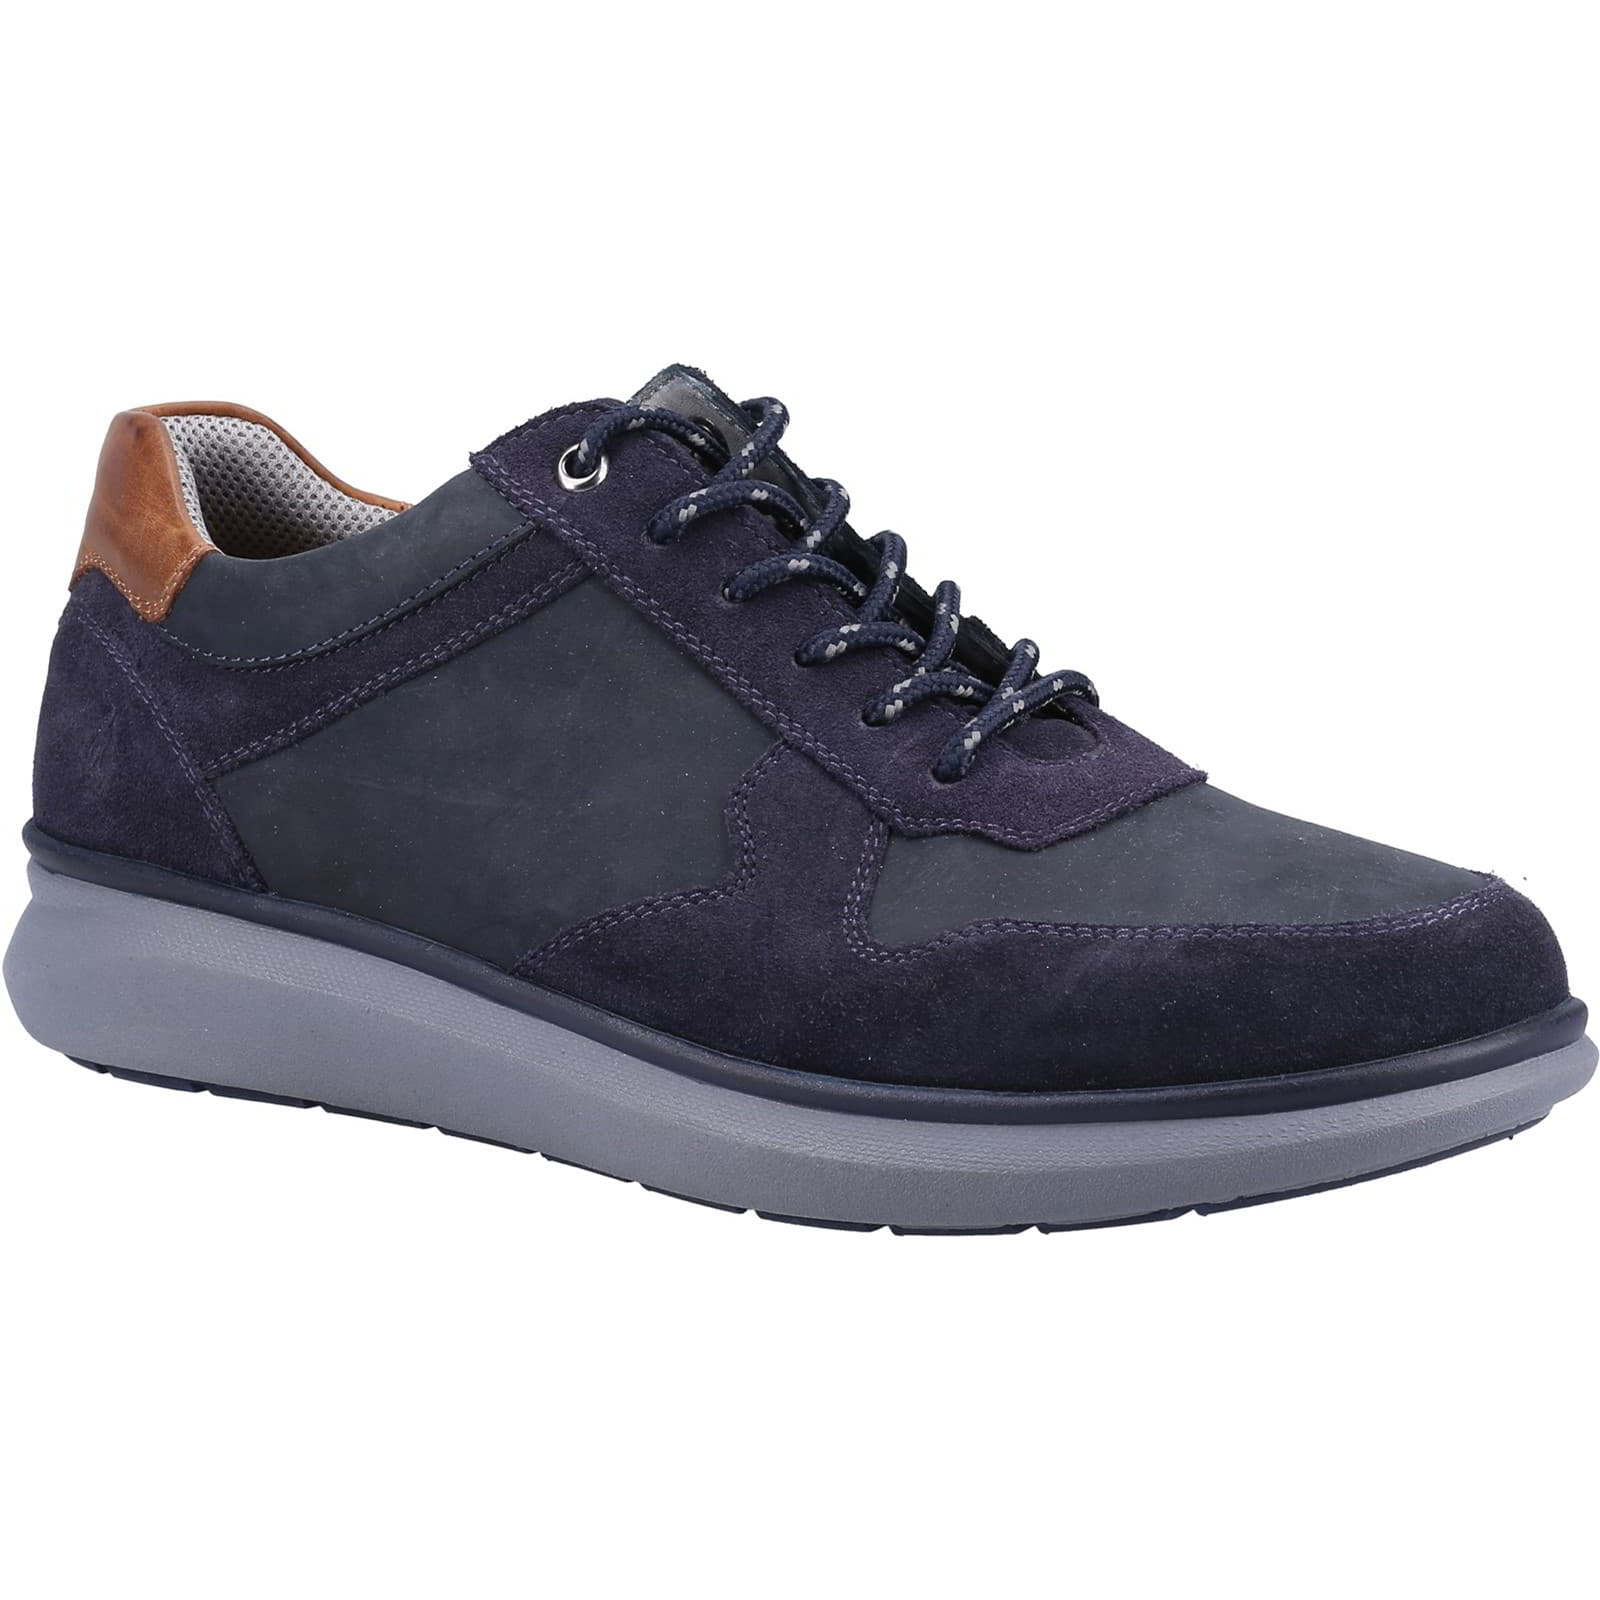 Hush Puppies Men's Braxton Lace Up Casual Trainers Shoes - UK 8